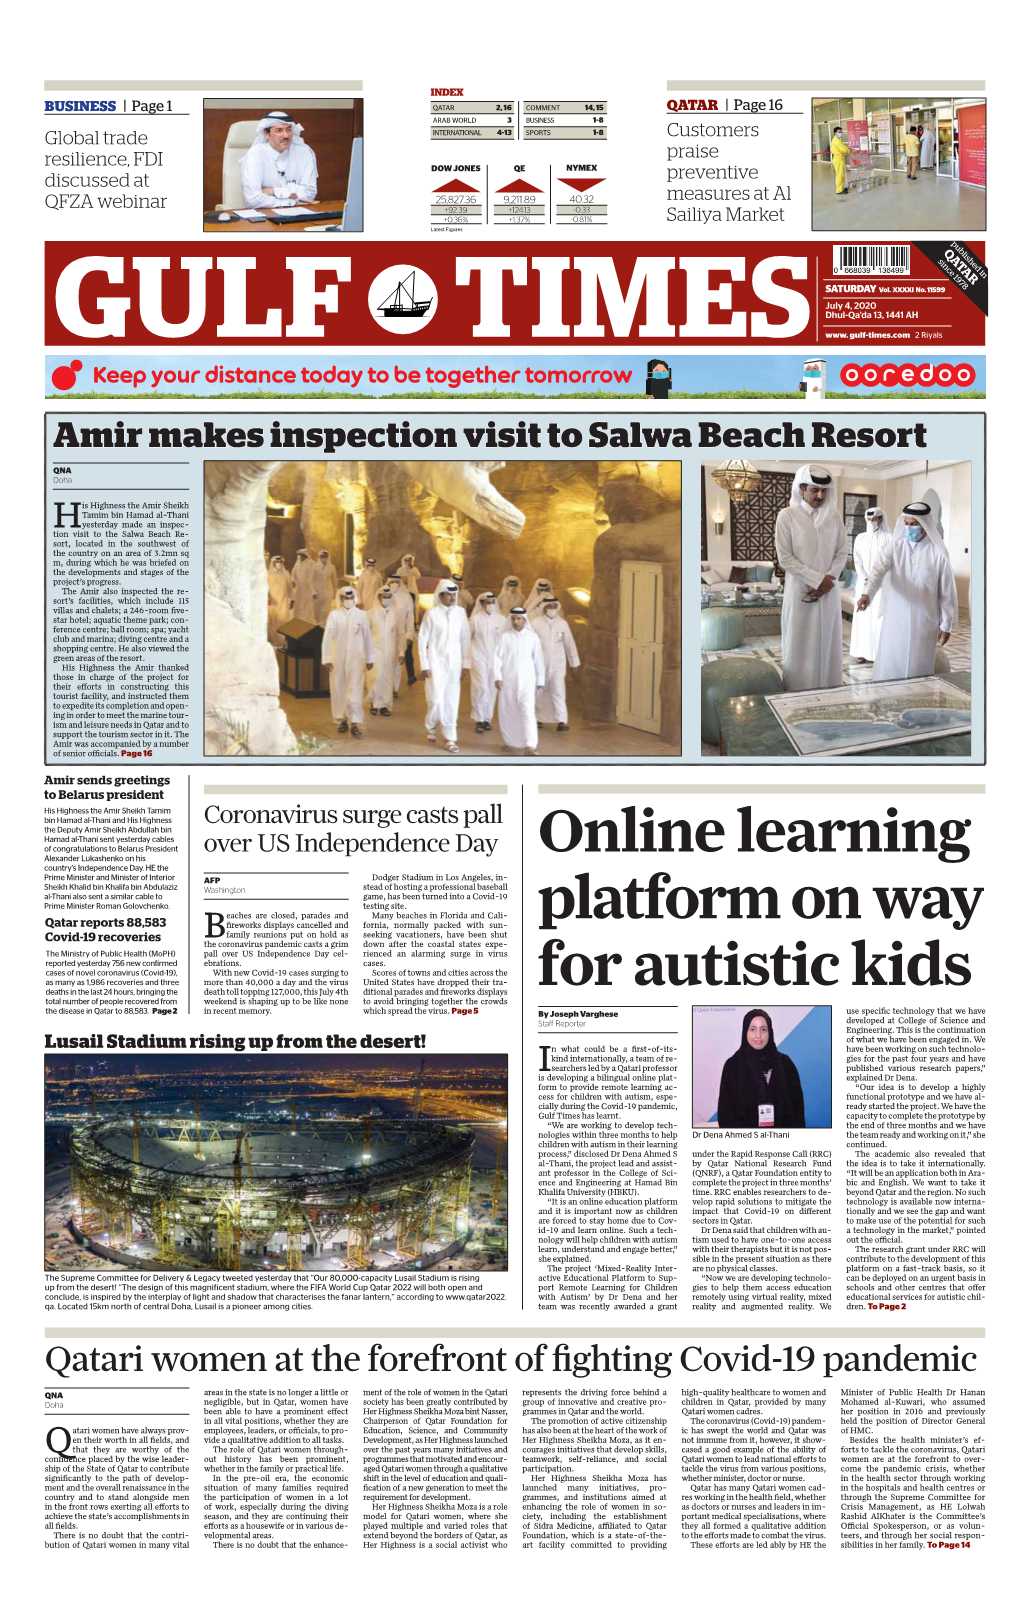 Online Learning Platform on Way for Autistic Kids